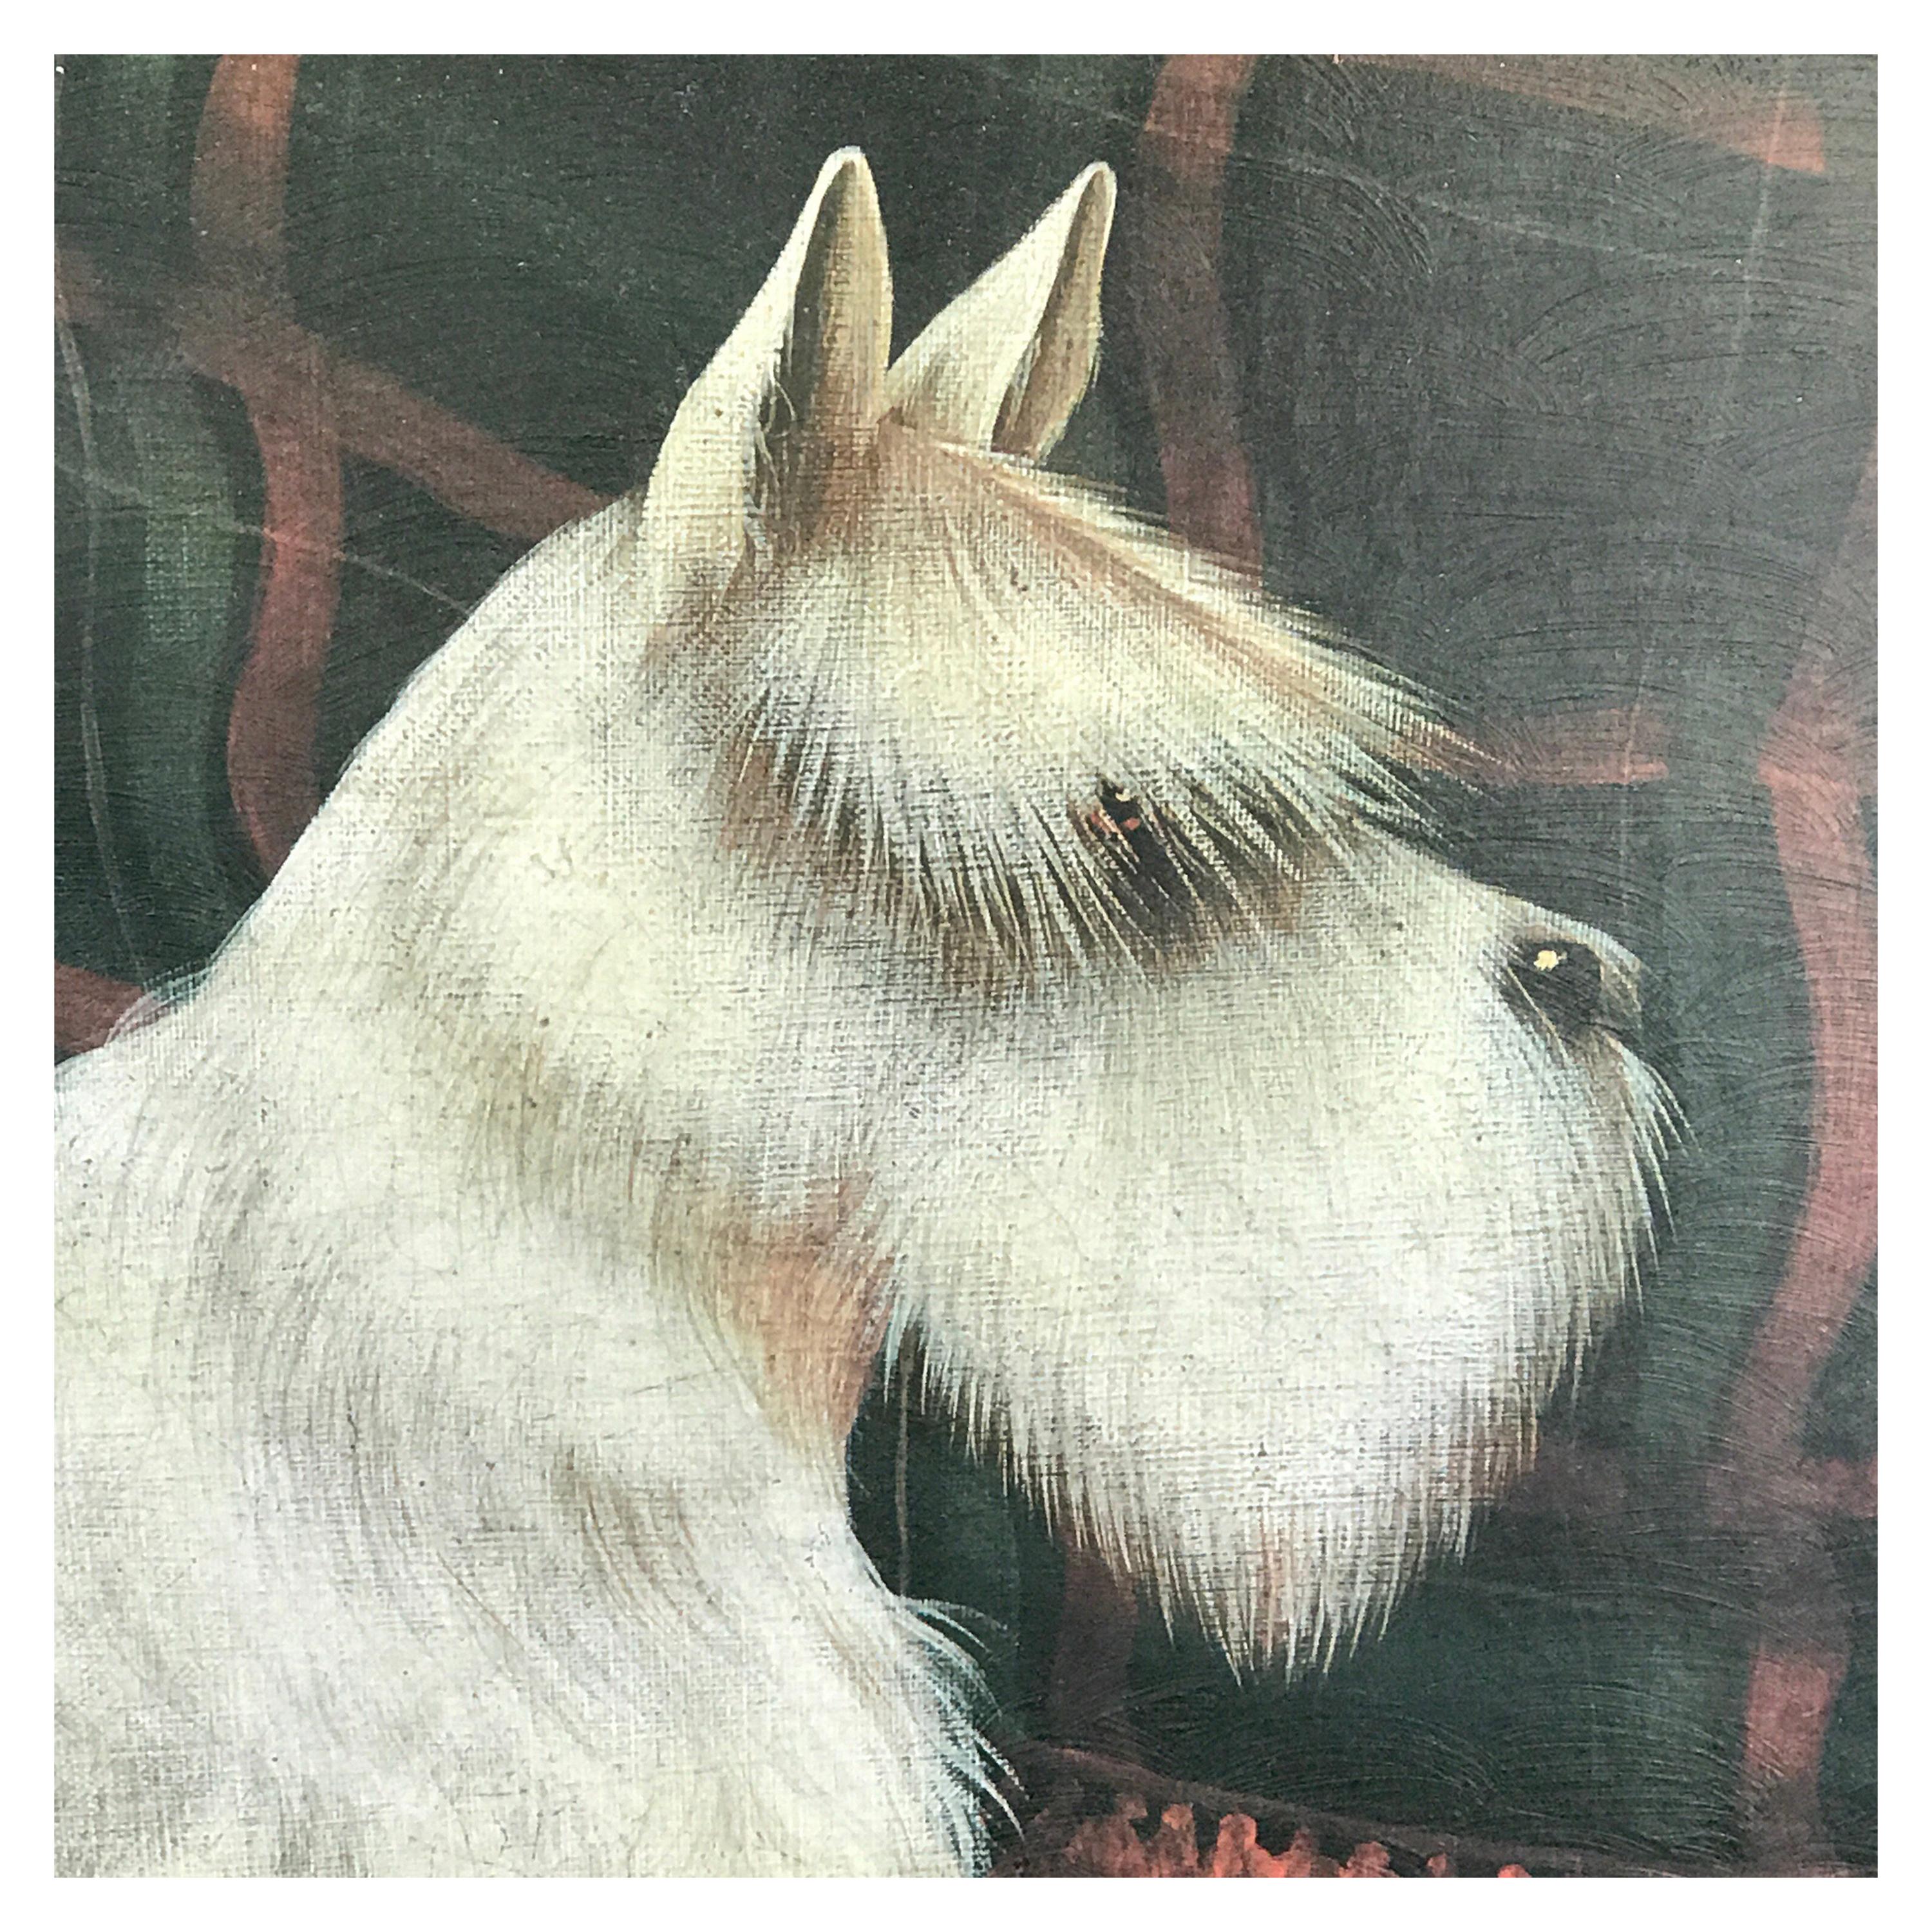 White Scottish Terrier painting Interior, by Paul Stagg
Depicting a white Scotty in a tartan draped interior with the tartan collar on the floor
Measures:
Oil on canvas 18